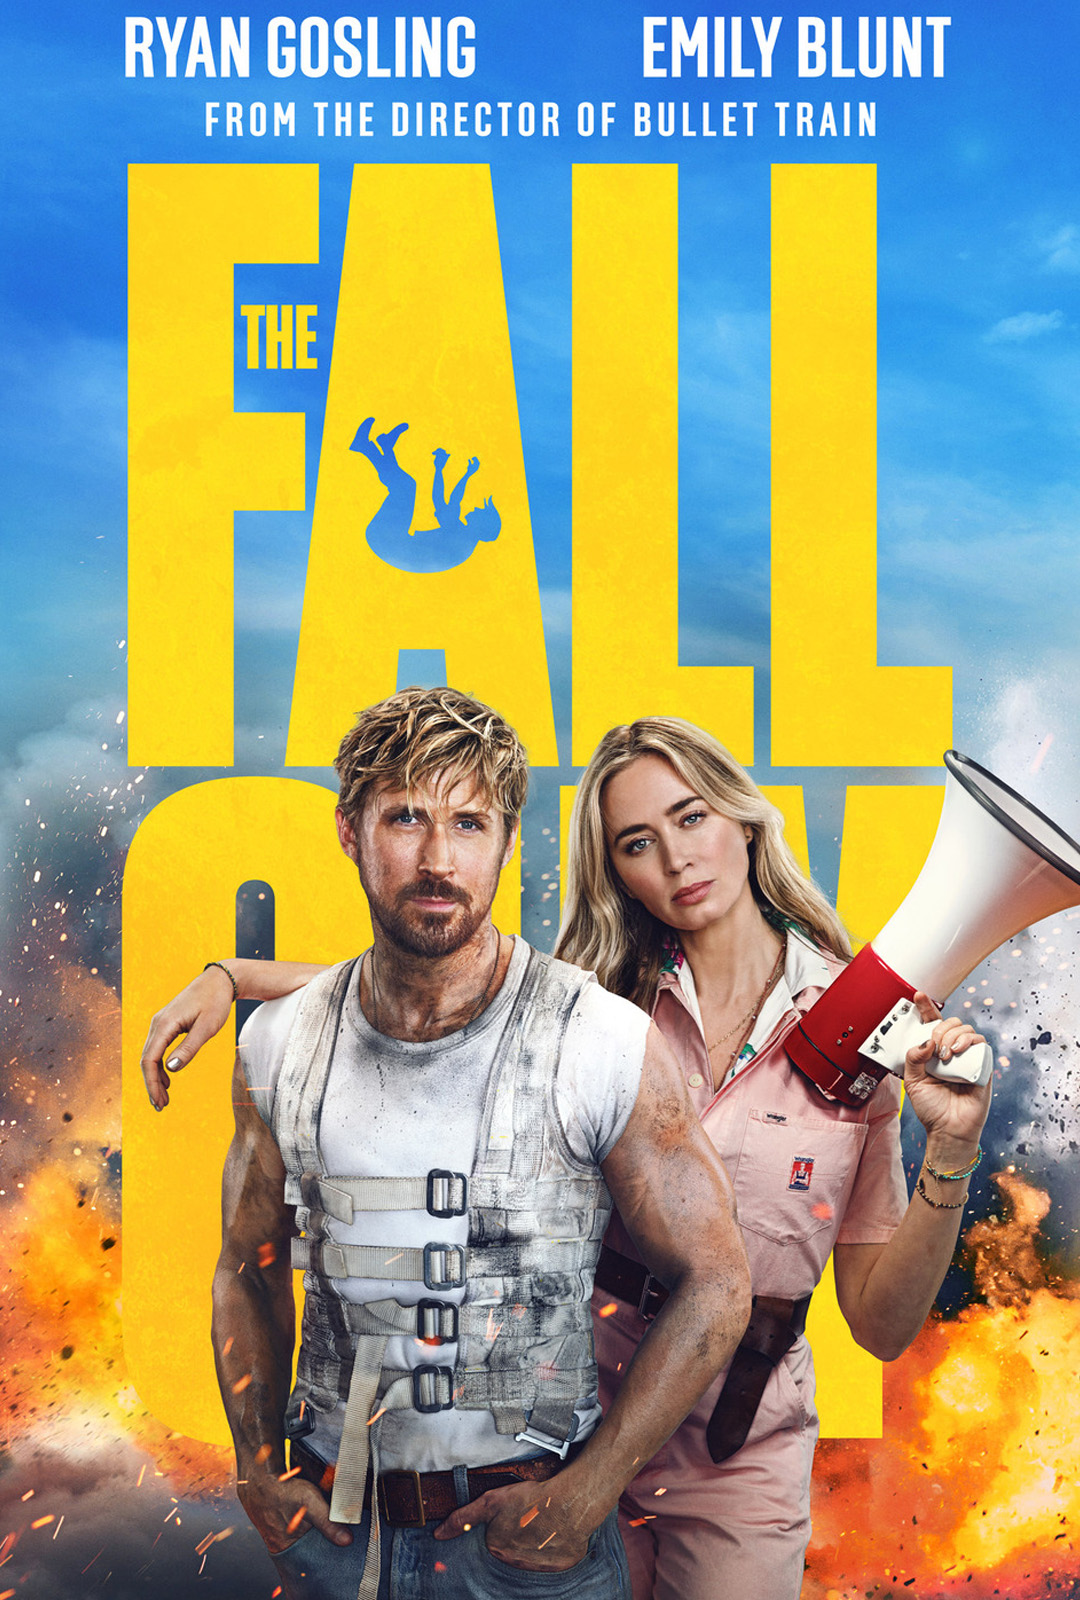 Movie Poster: The Fall Guy